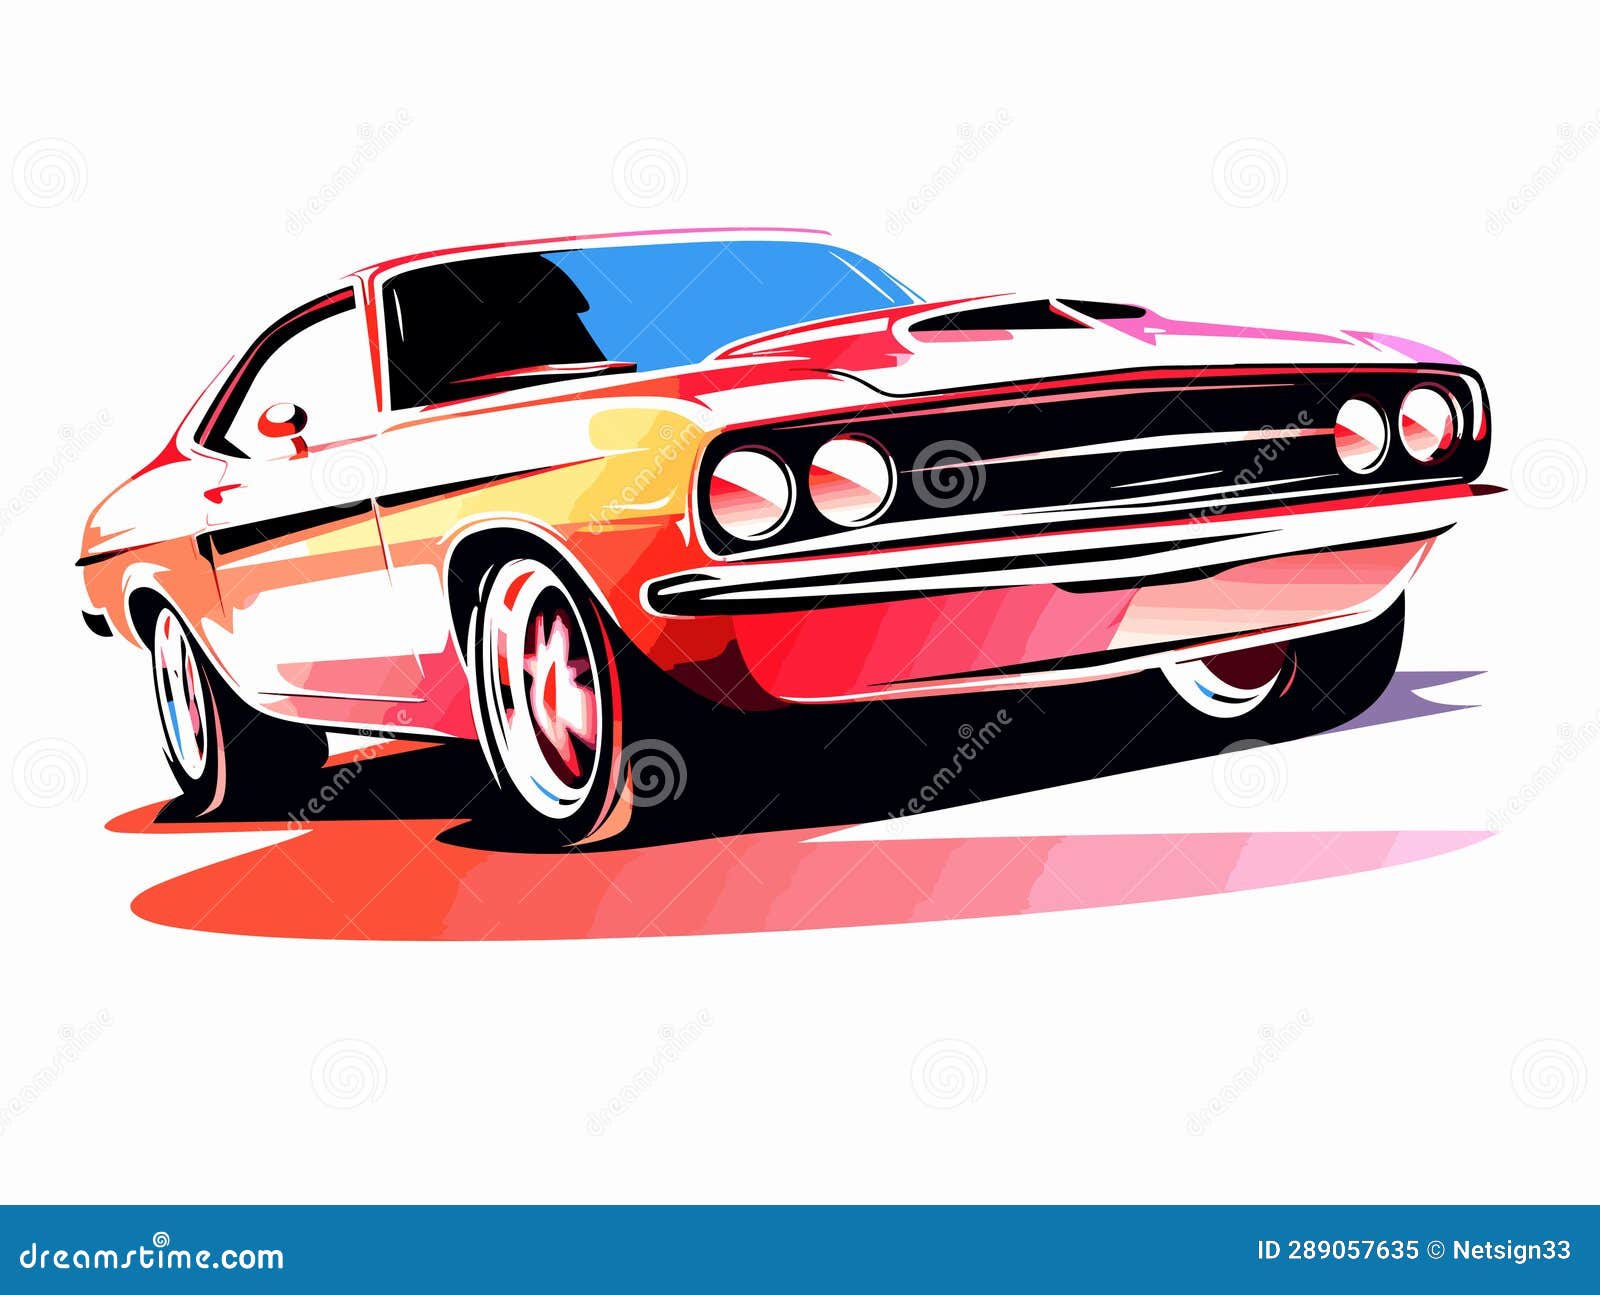 motorsports vintage red car in the style of colorful gradients